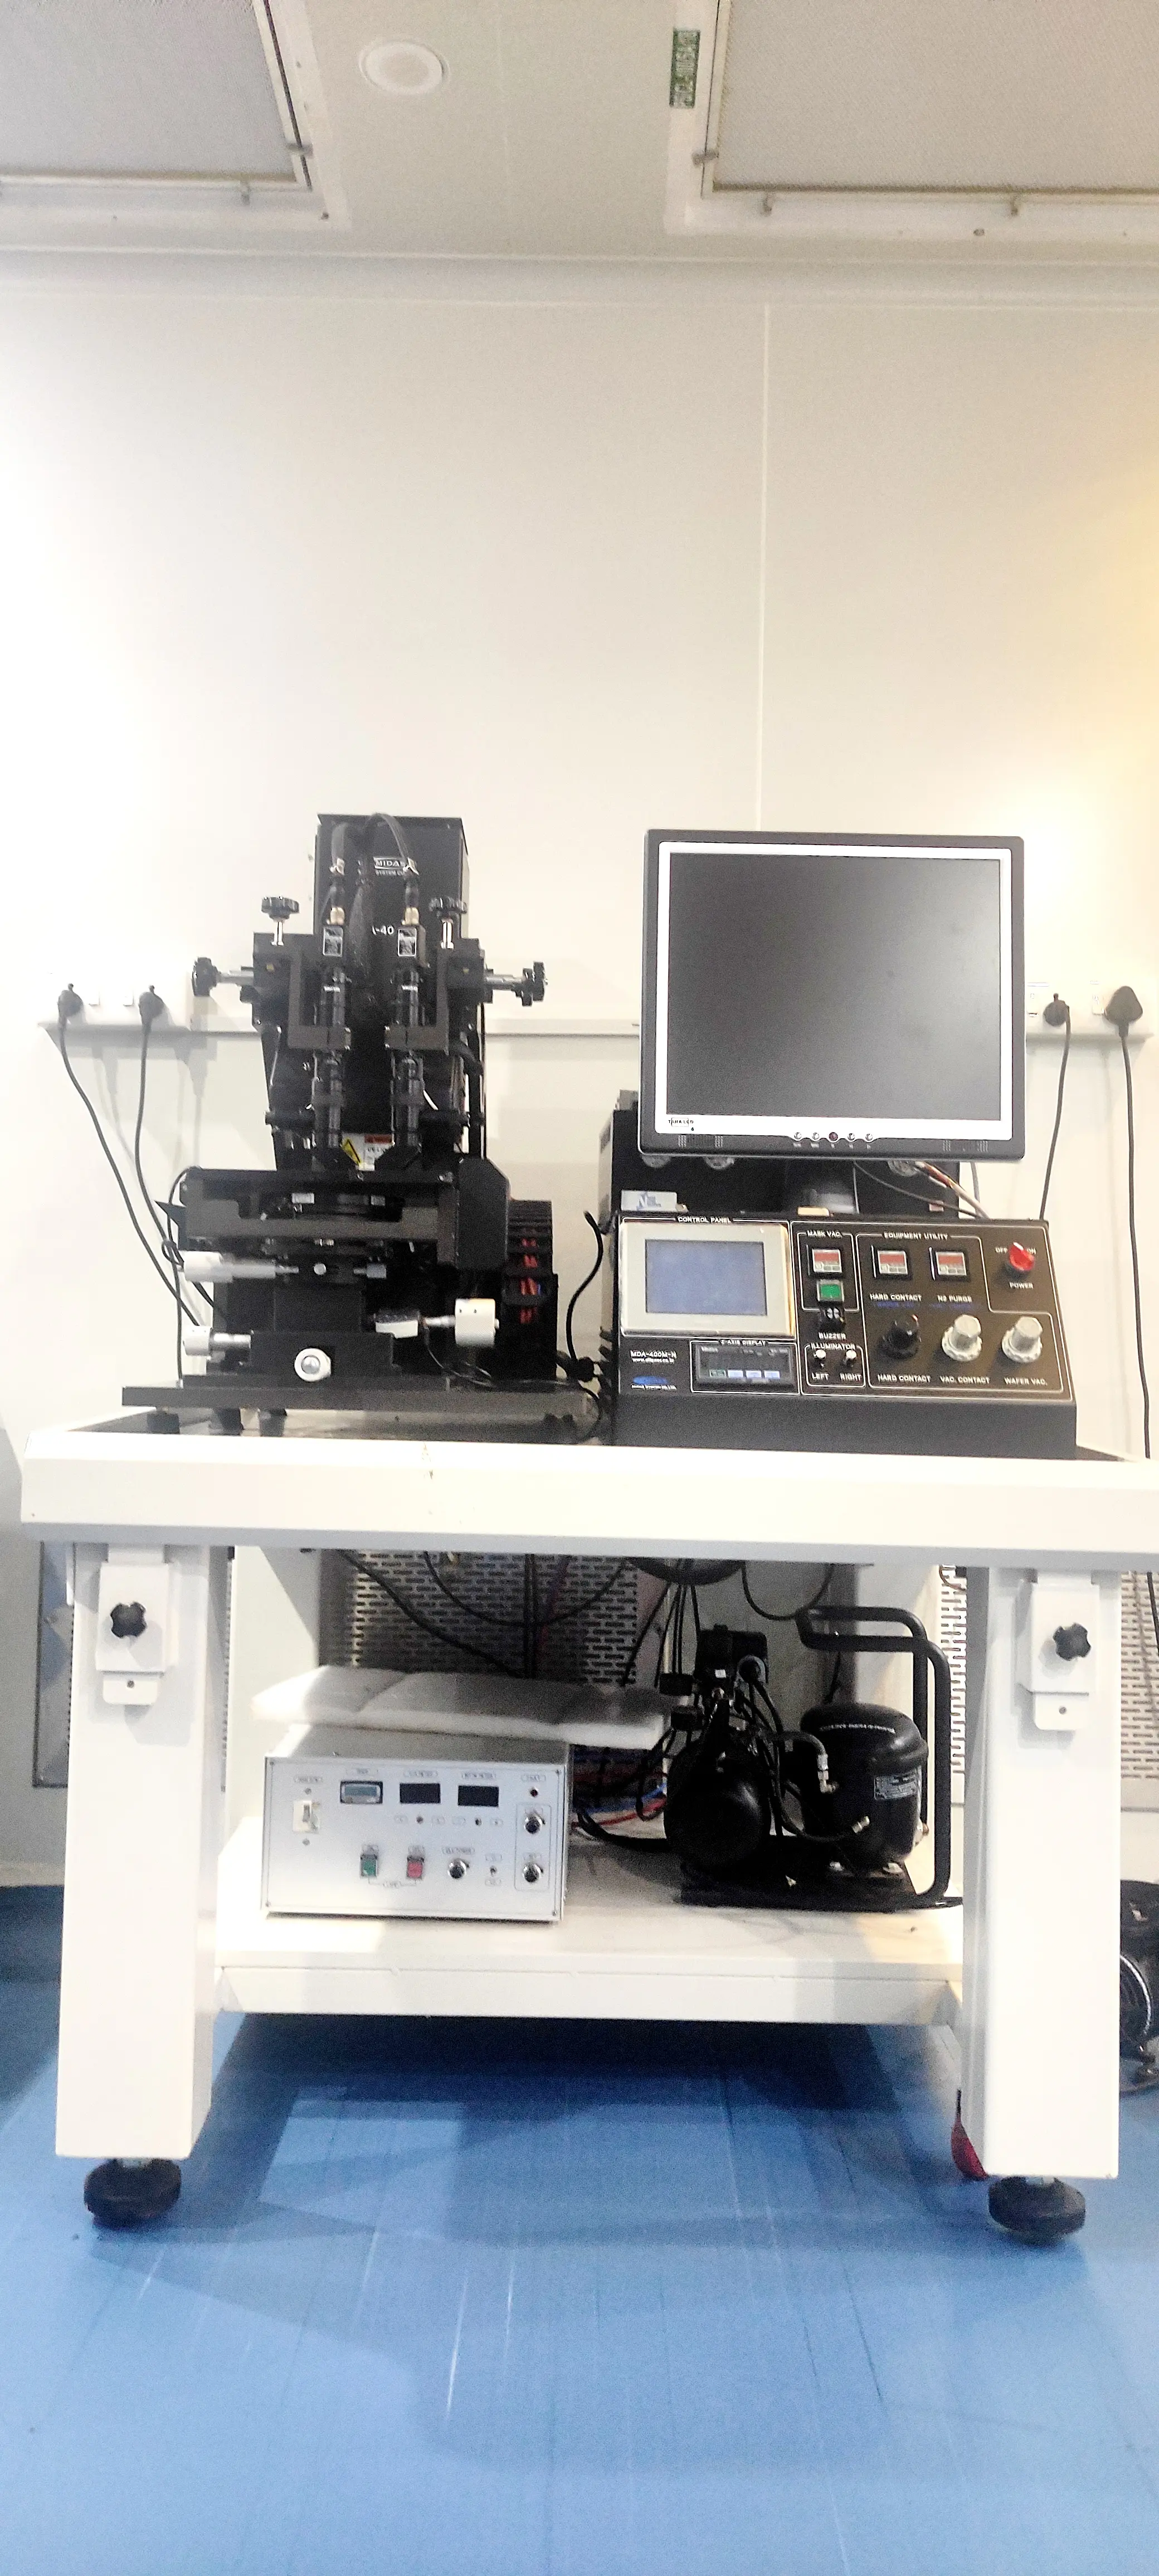 Image of the mask aligner that was used for lithography